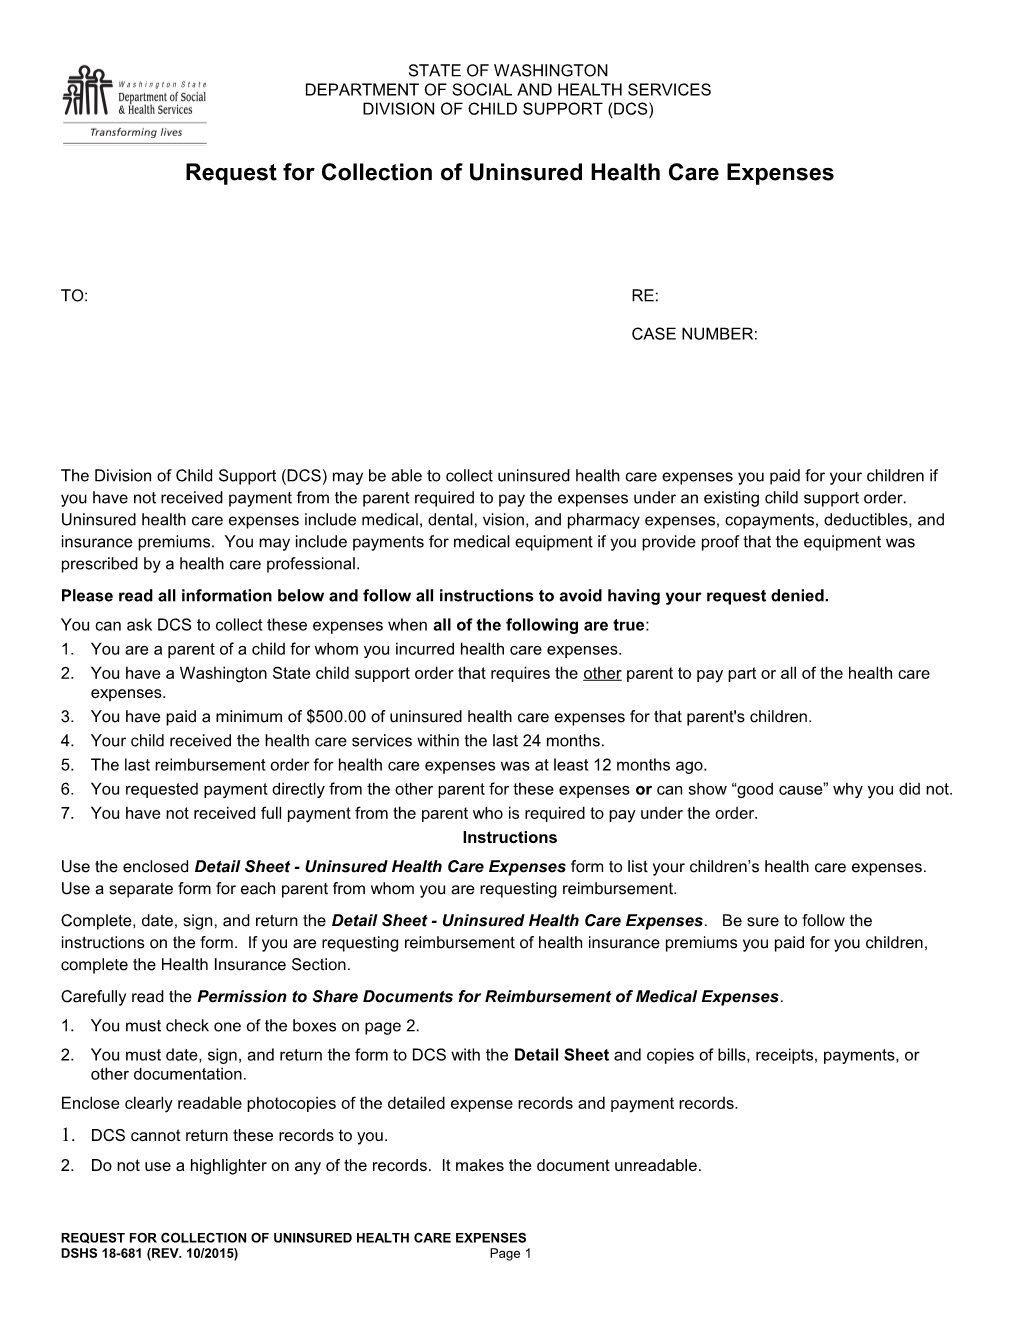 Request for Collection of Uninsured Health Care Expenses